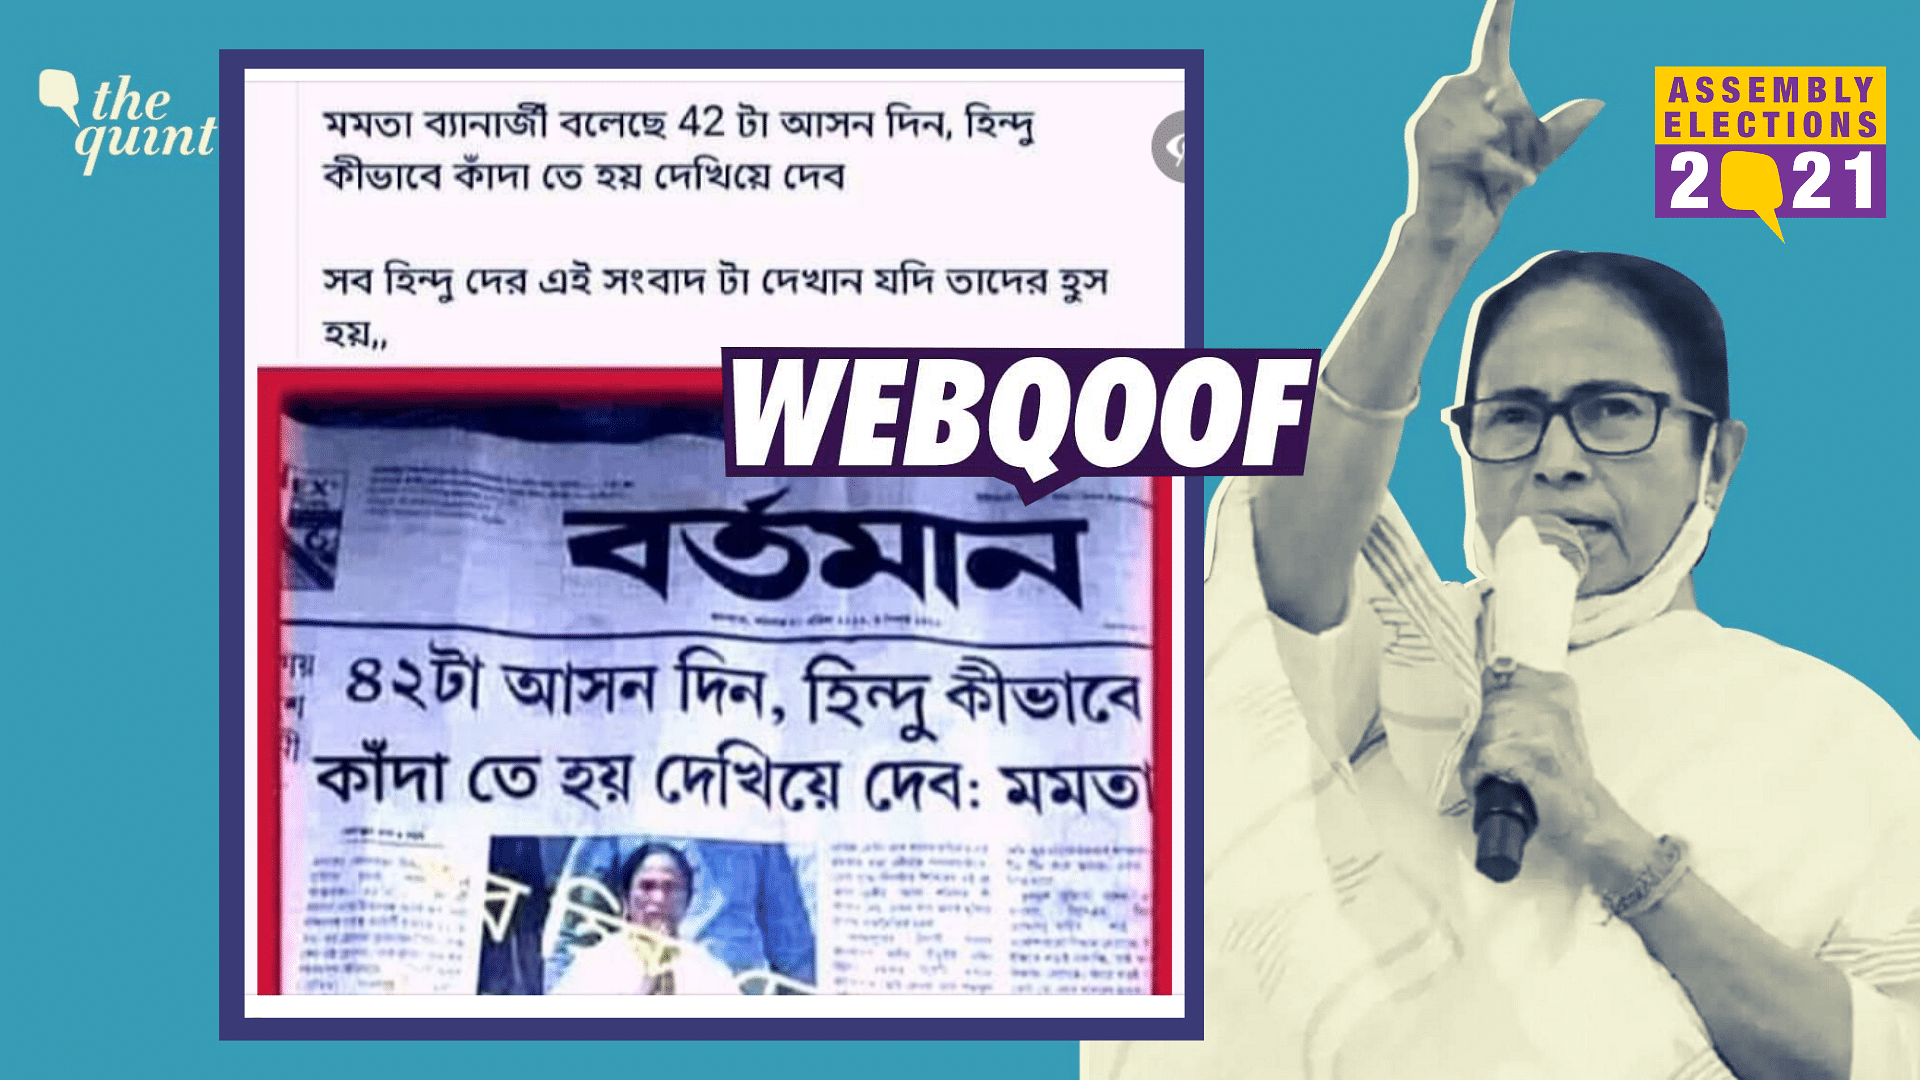 Fact-Check of WB Elections | We found that the newspaper clipping was photoshopped and certain words in the headline were replaced with new ones.